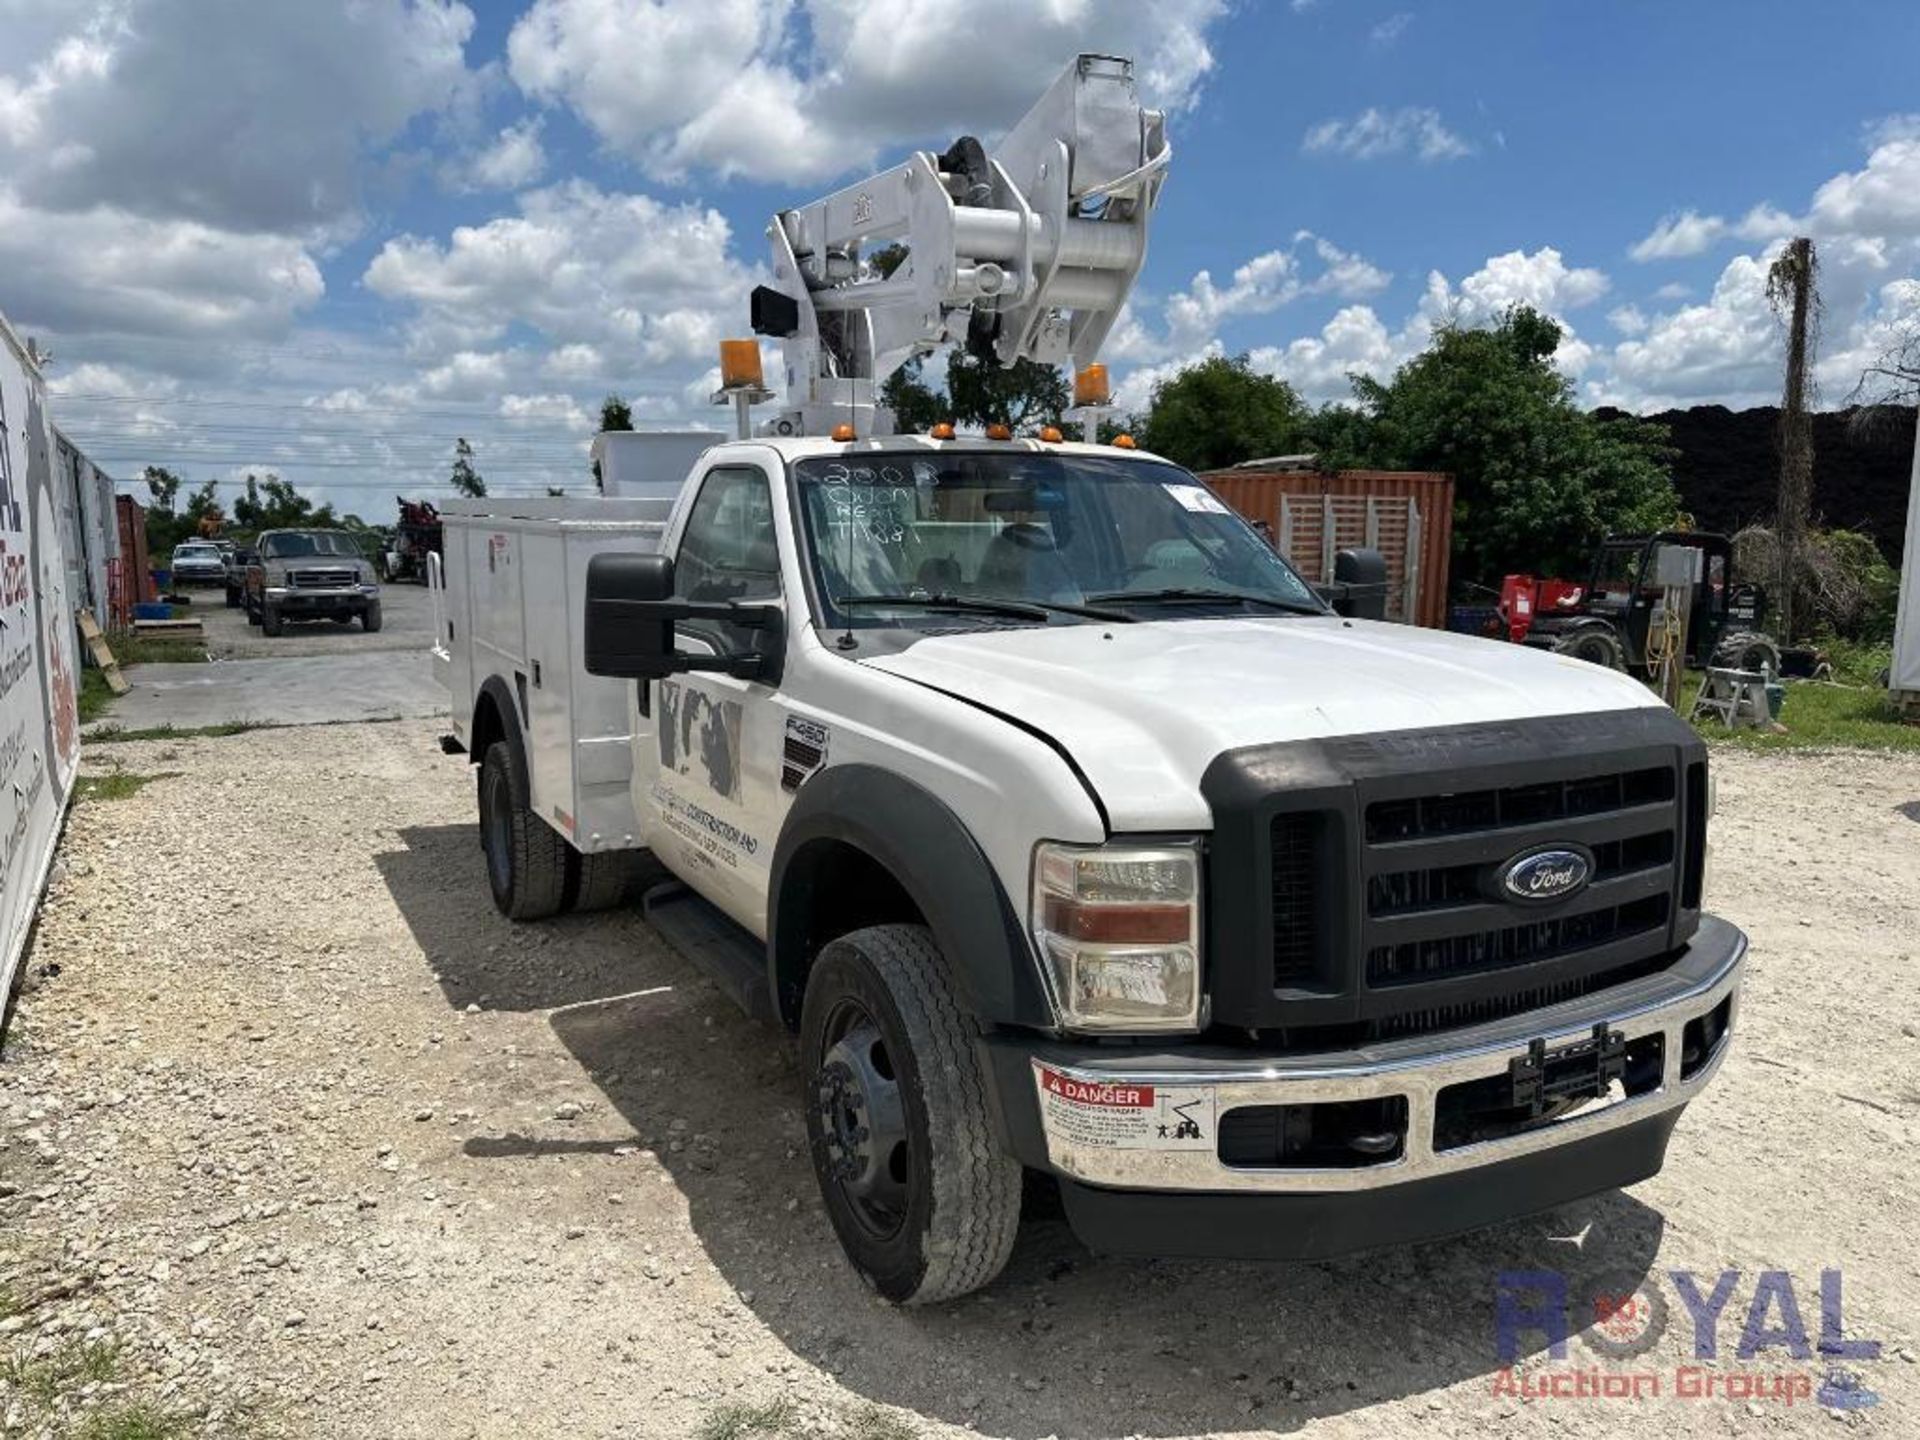 2008 Ford F-450 Bucket Truck - Image 4 of 35